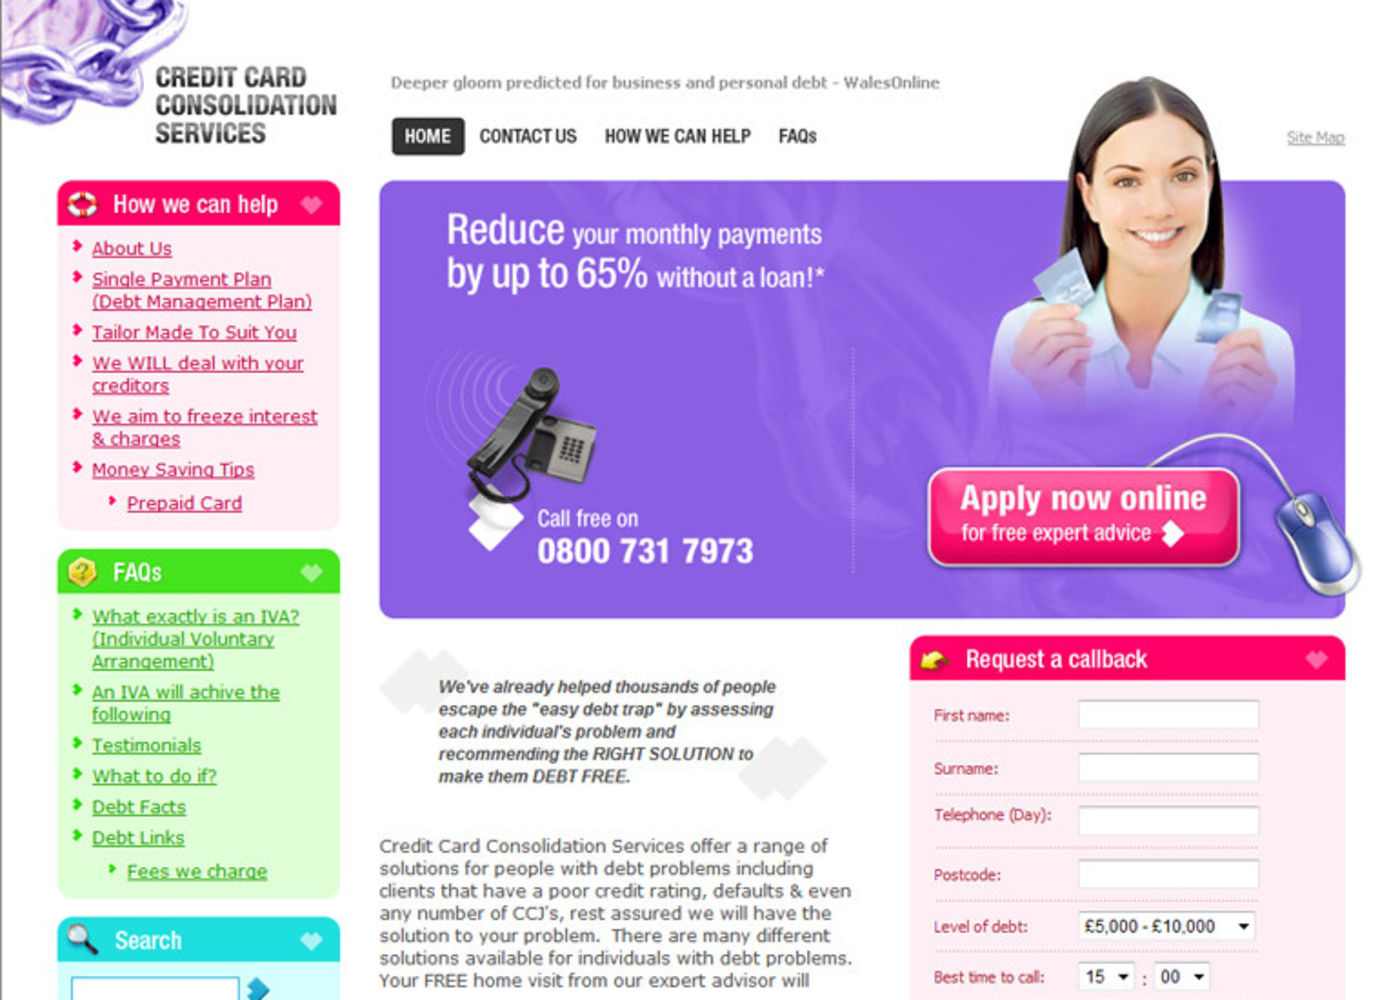 Credit Card Consolidation Services Homepage header